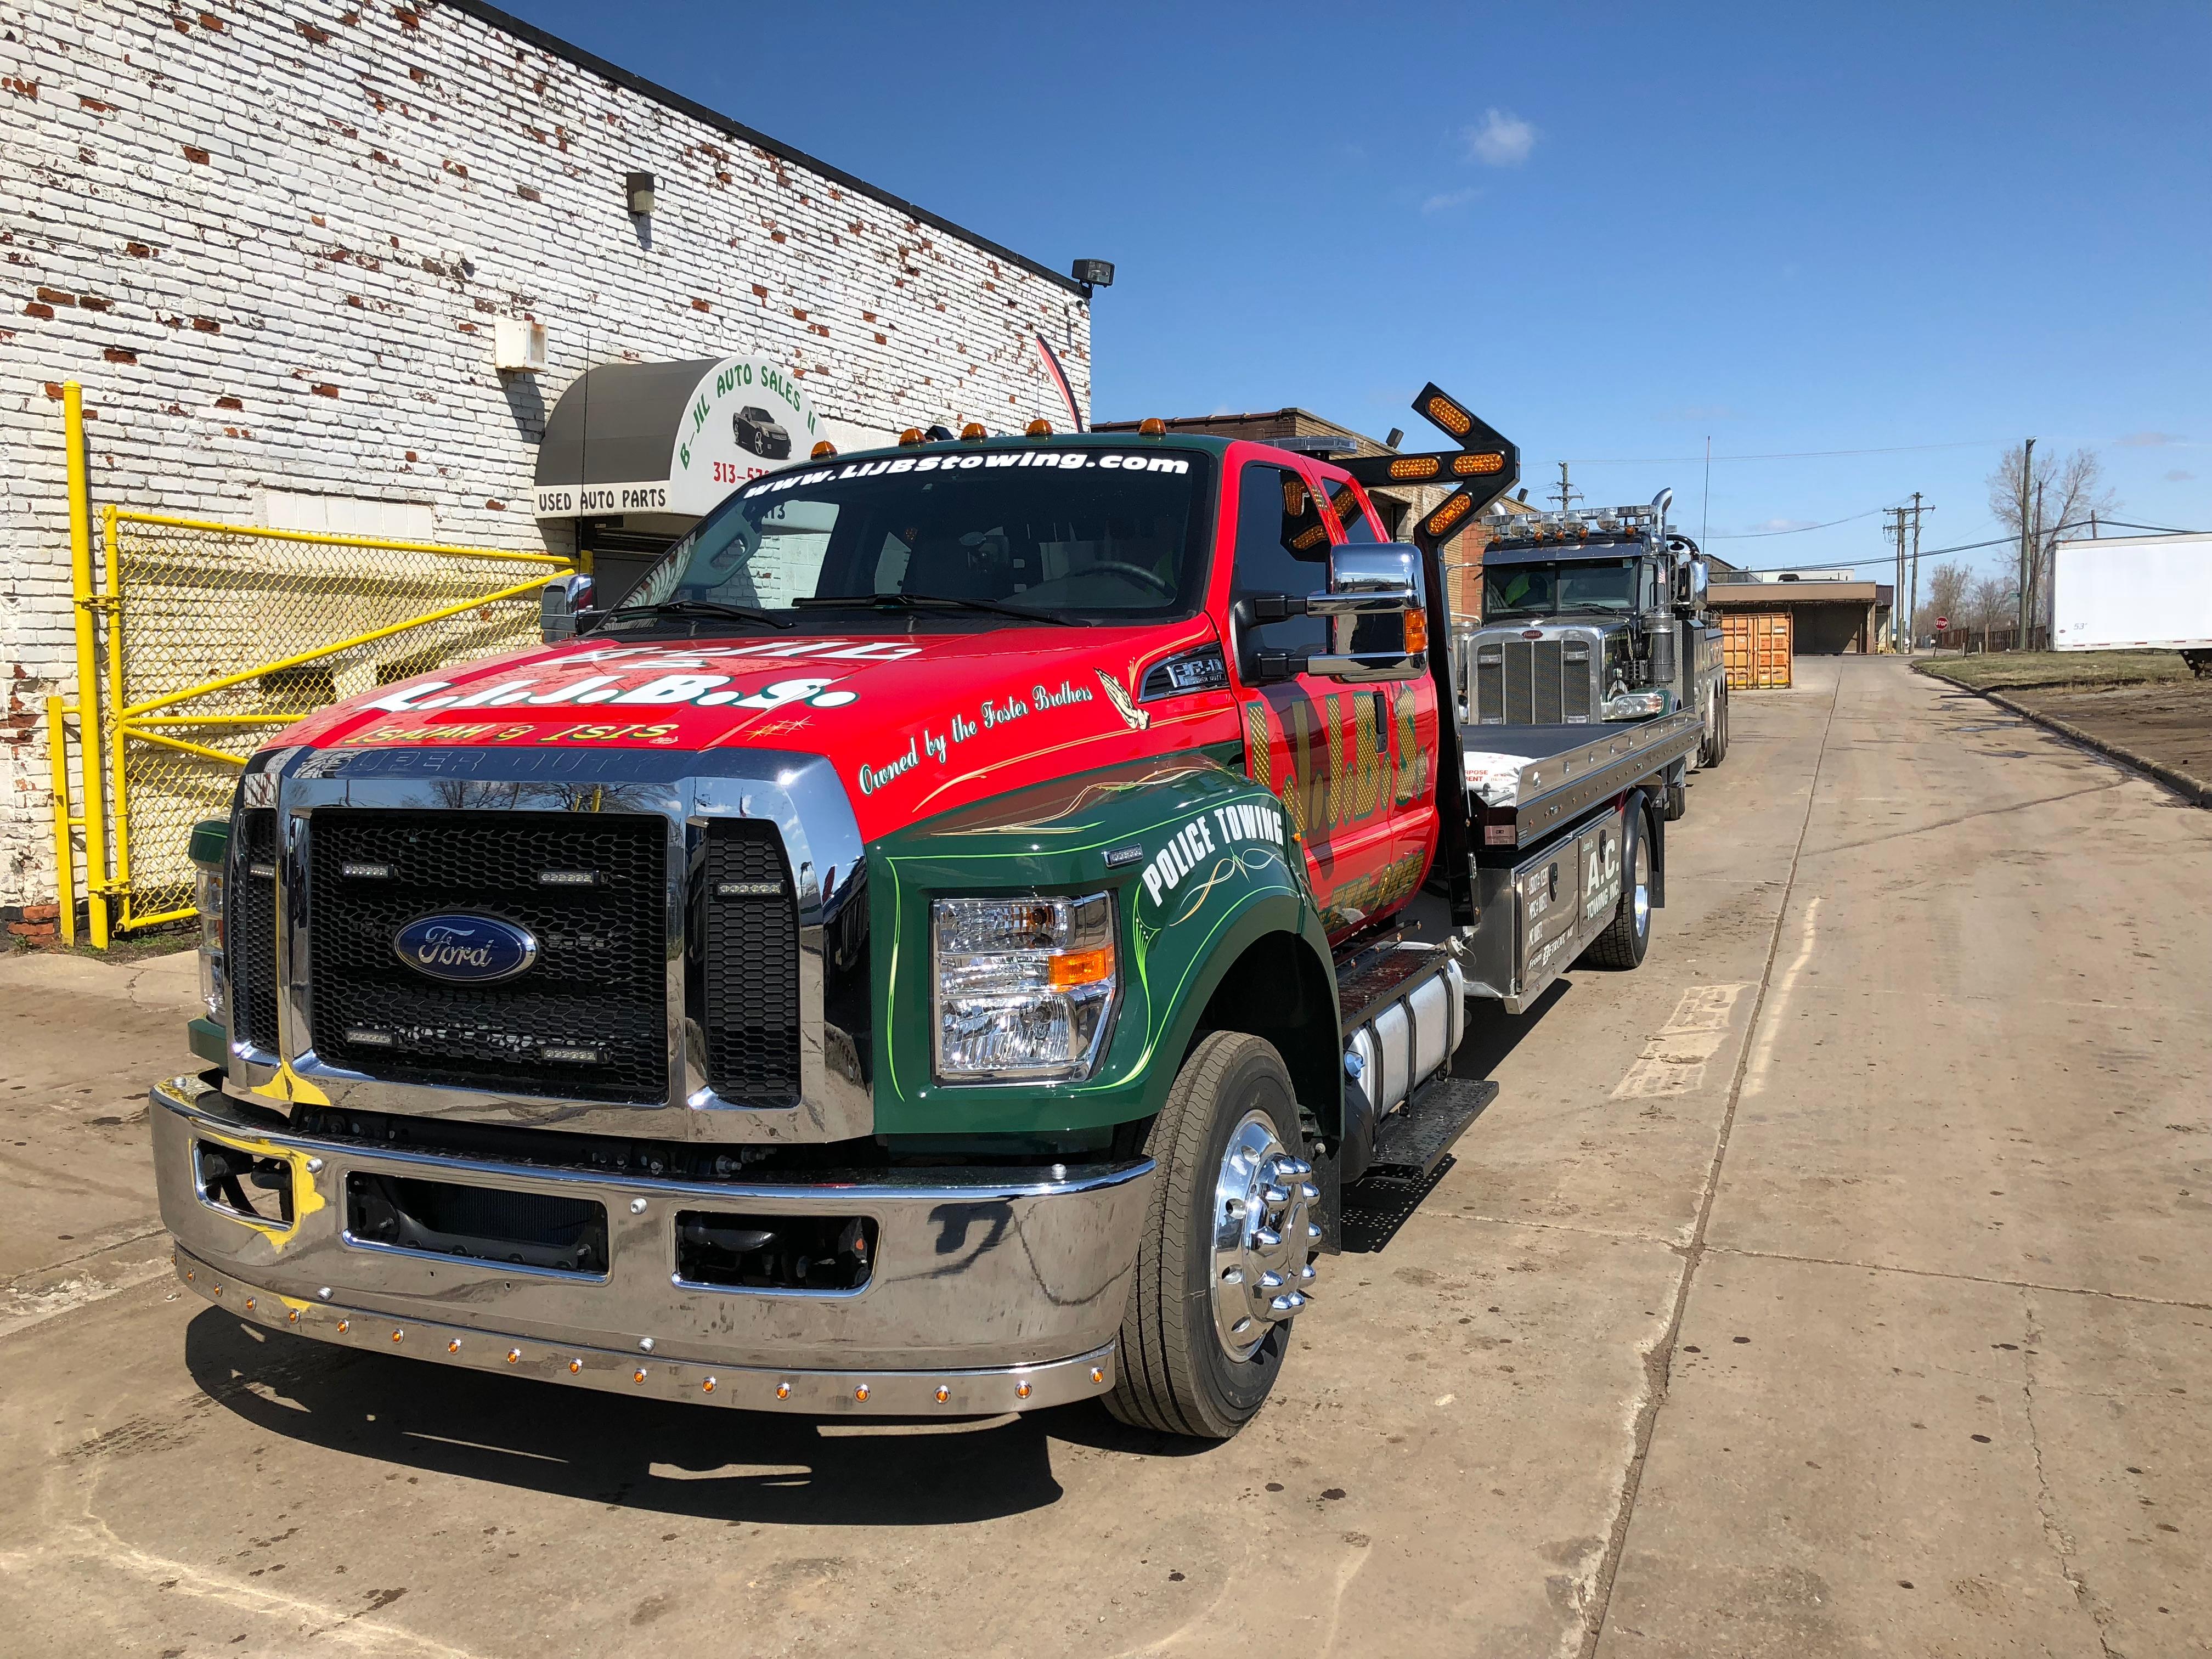 L.I.J.B.S. Towing | (800) 339-9899 | Detroit, MI | 24 Hour towing Service | Light Duty Towing | Medium Duty Towing | Heavy Duty Towing | Roadside Assistance | Jumpstarts | Car Lockouts | Accident Recovery and Cleanup | 4x4 Off Road Recovery | Vehicle Winching | Vehicle Up-righting | Rollover Recovery | Vehicle Transport | Flatbed Towing | Enclosed Trailers | Tire Changes | Police Rotation | We buy Junk Cars - Free Pickup